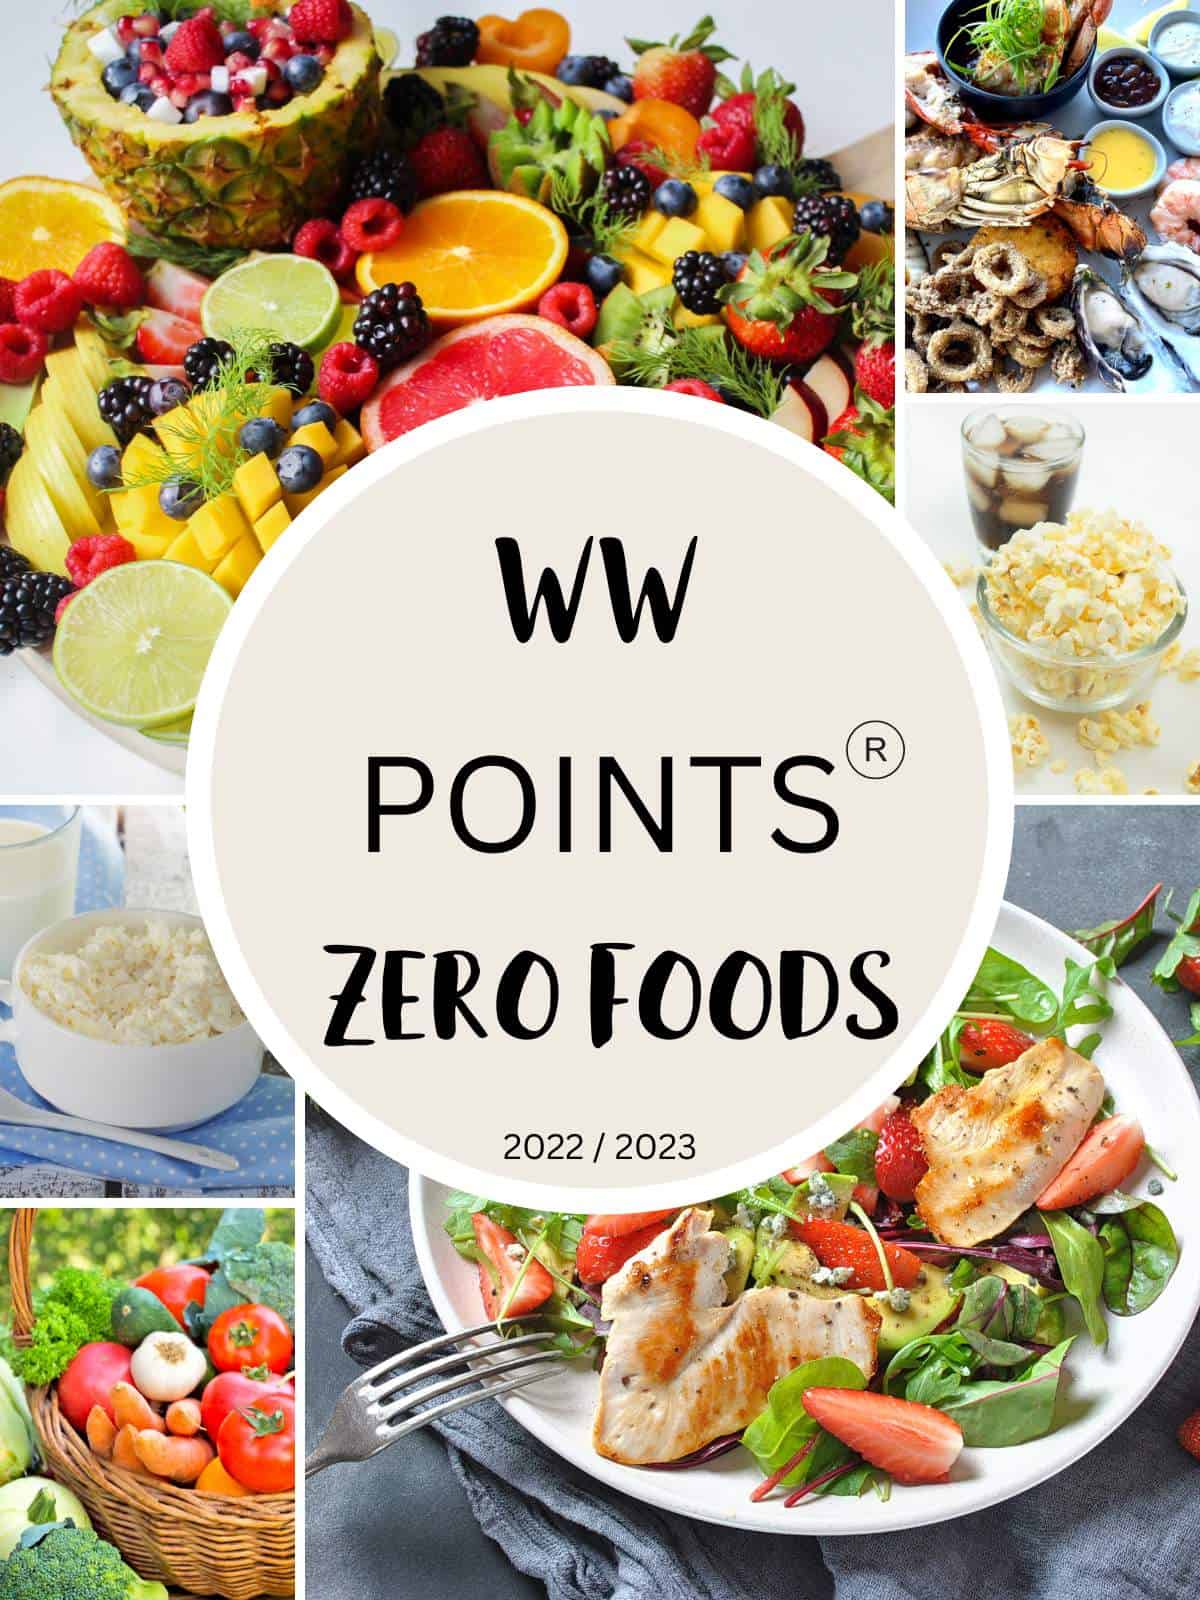 A collage of food picture with text overlay stating WW Points Zero Foods 2022 / 2023